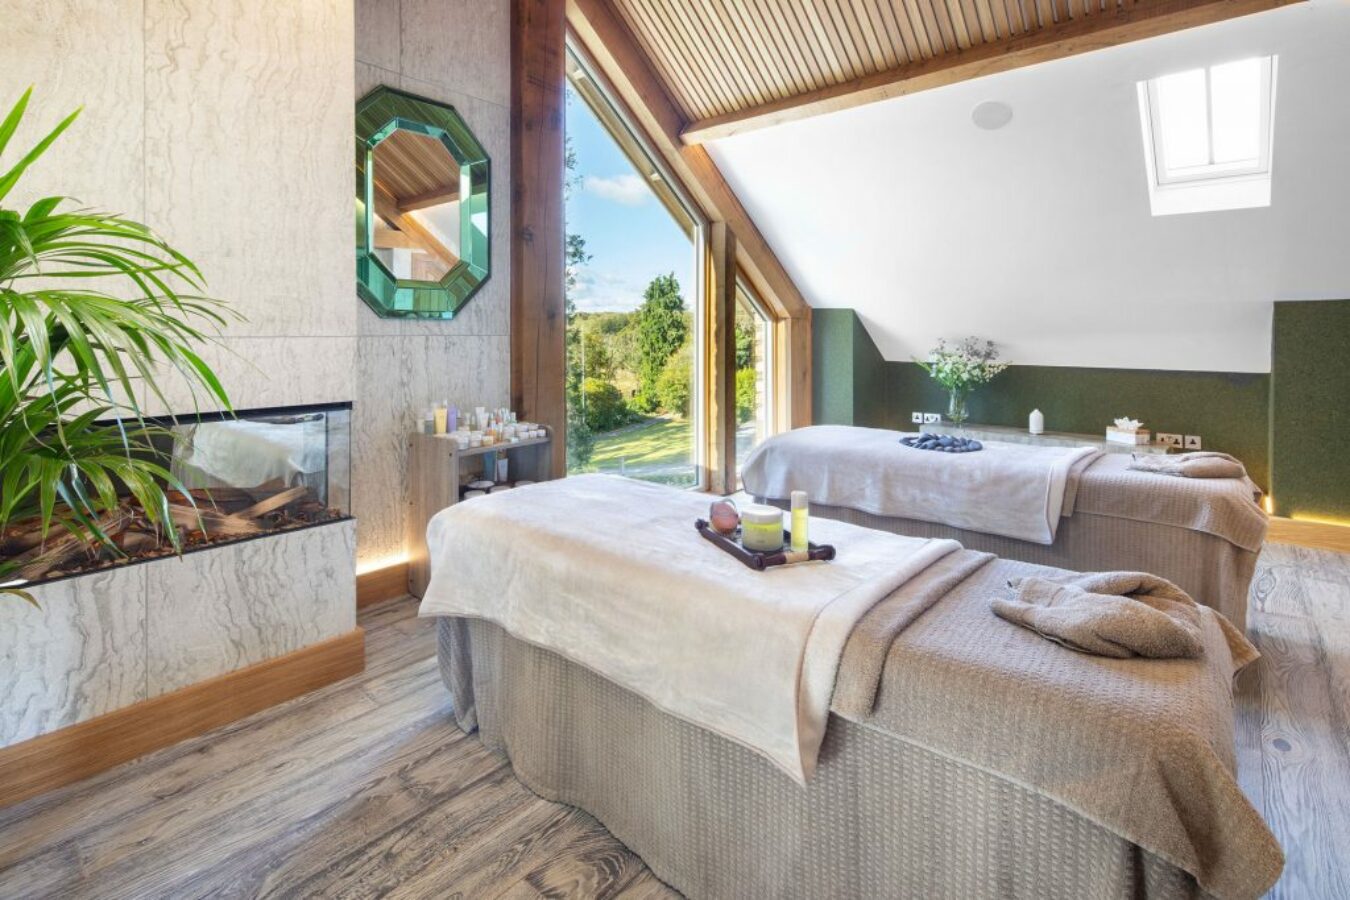 Review - Gilpin Lake House & Spa, Windermere